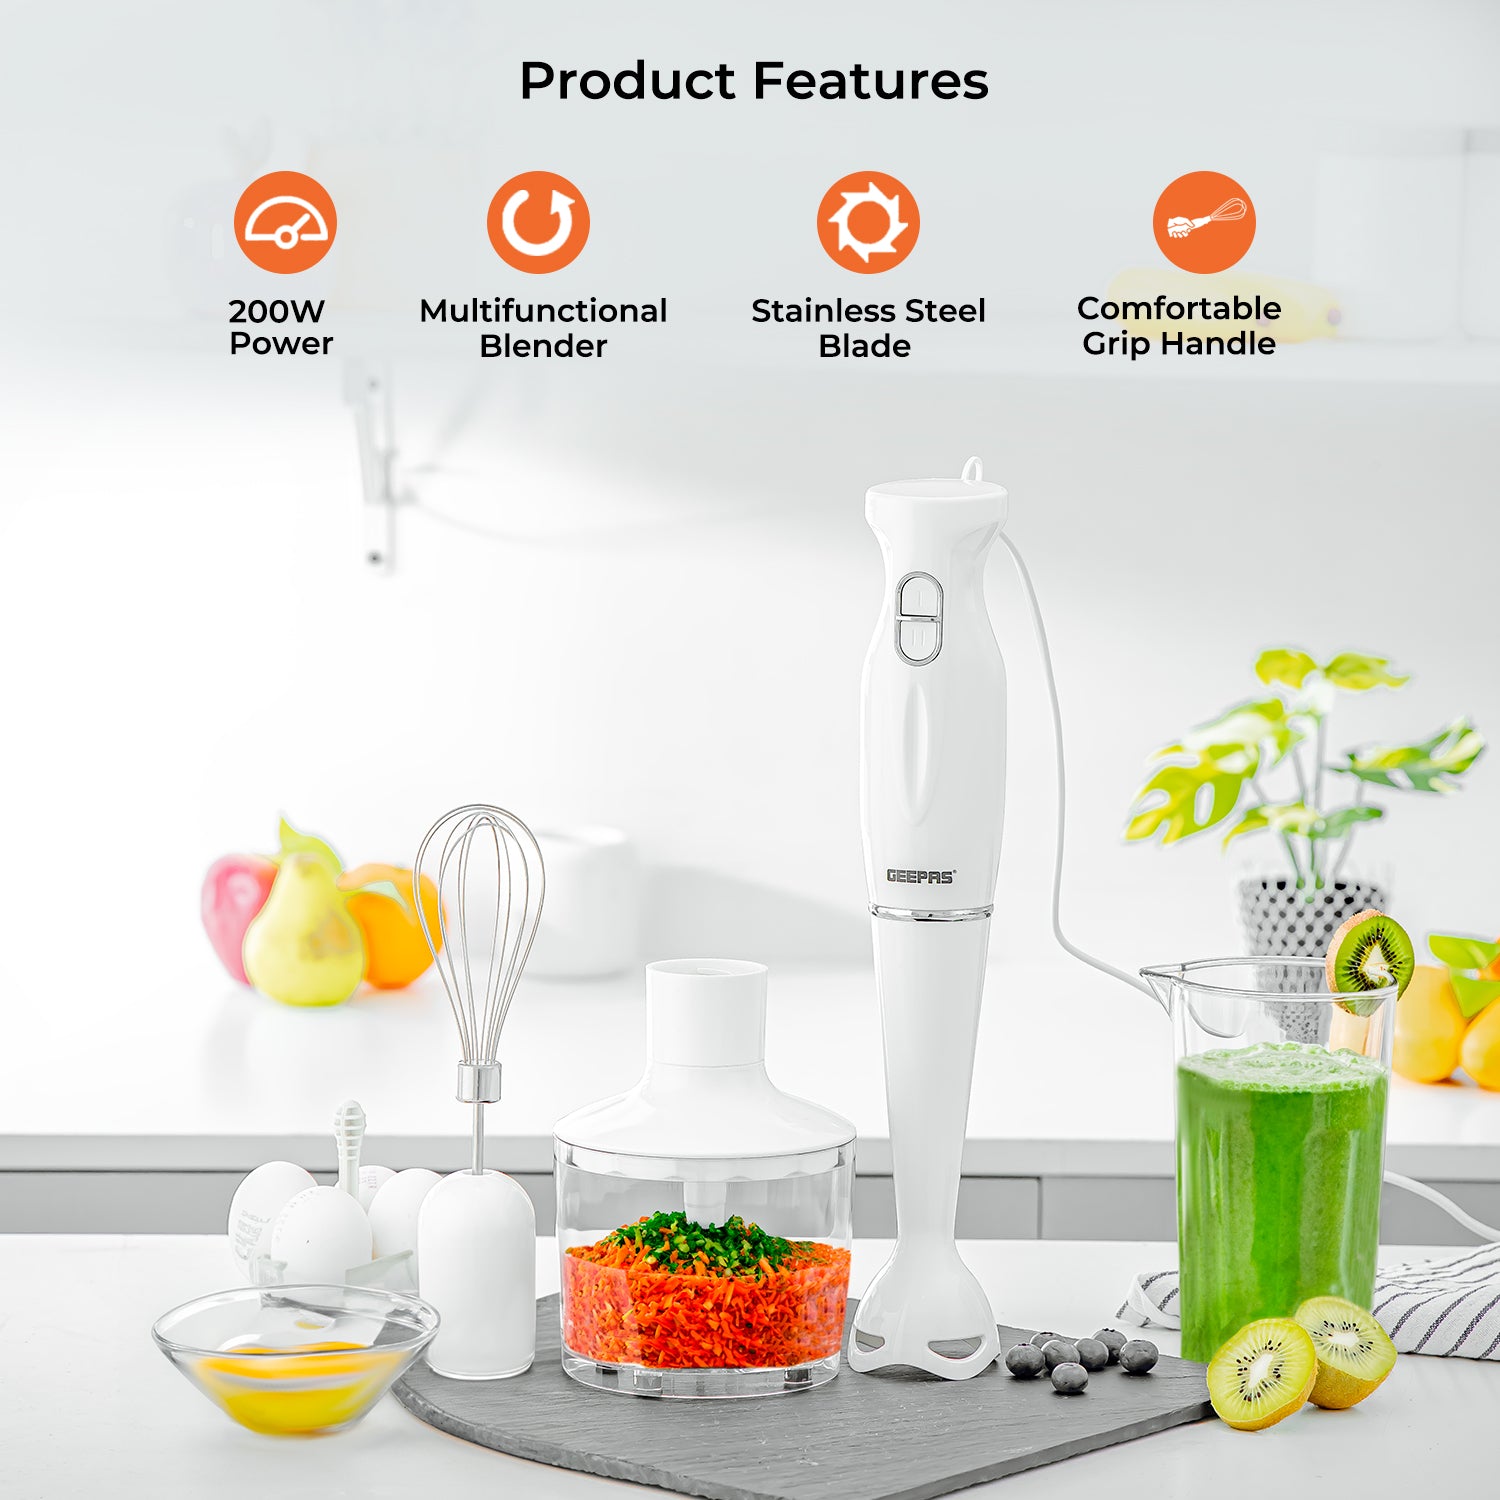 4-in-1 White Hand Blender with Electric Whisk